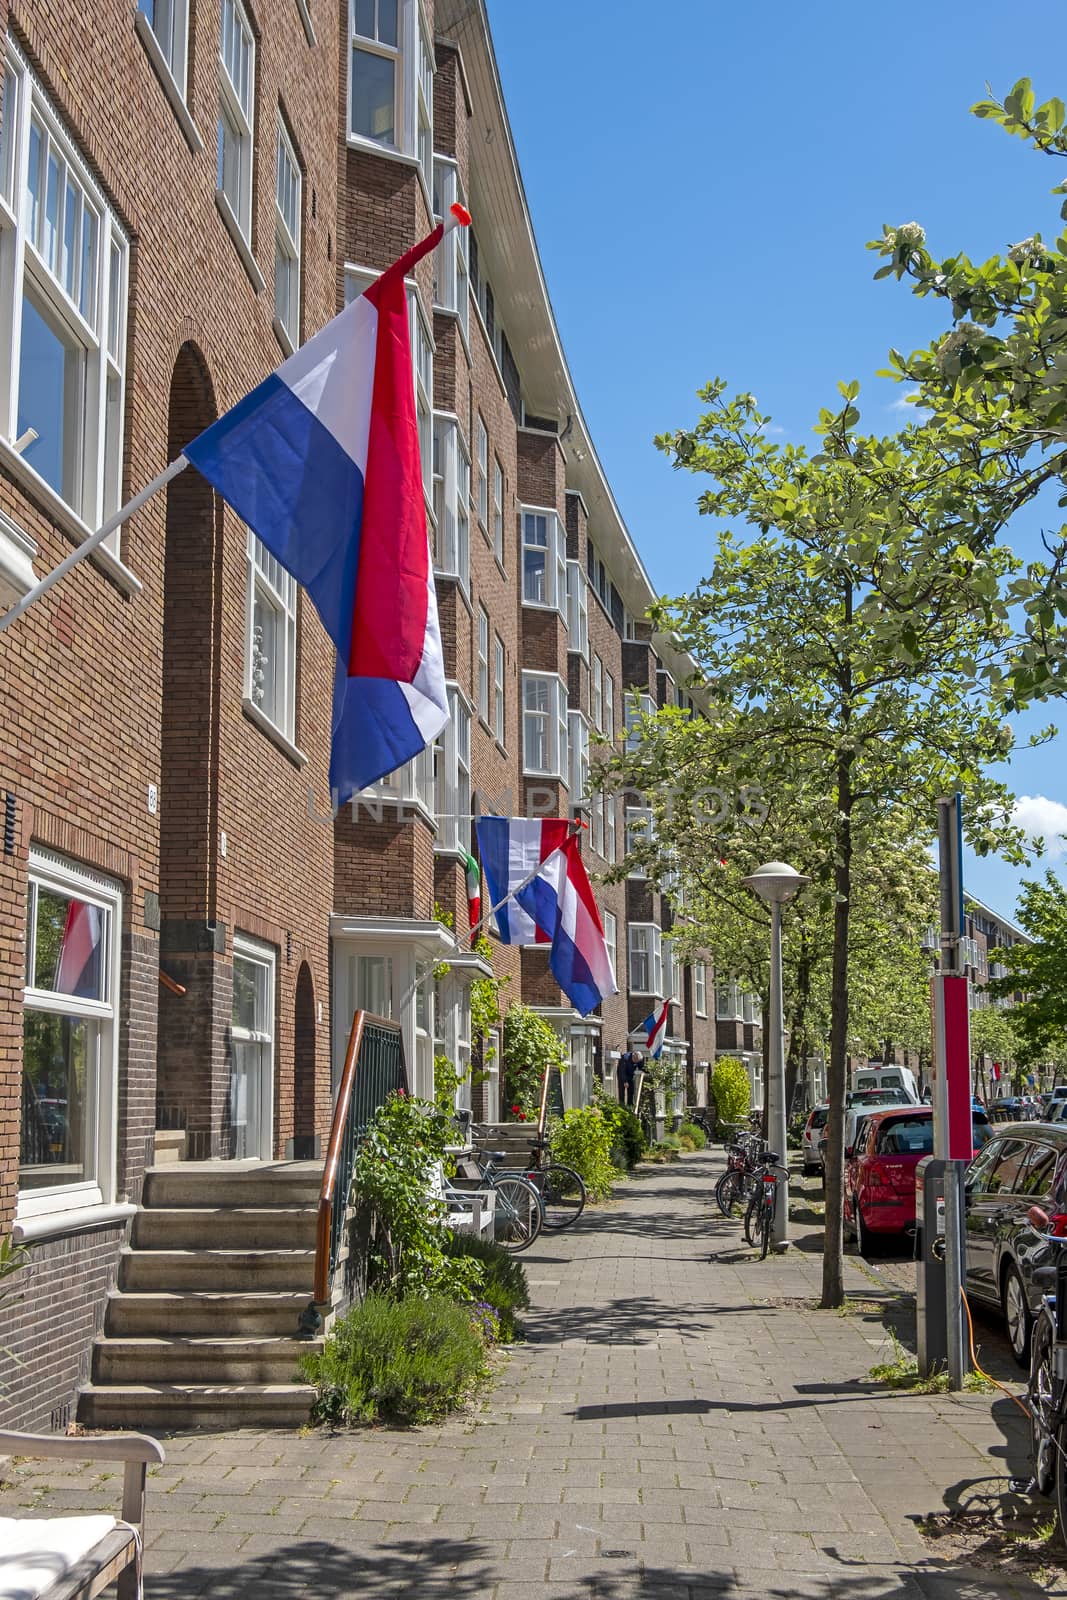 Flags on the houses in Amsterdam in the Netherlands at kingsday by devy